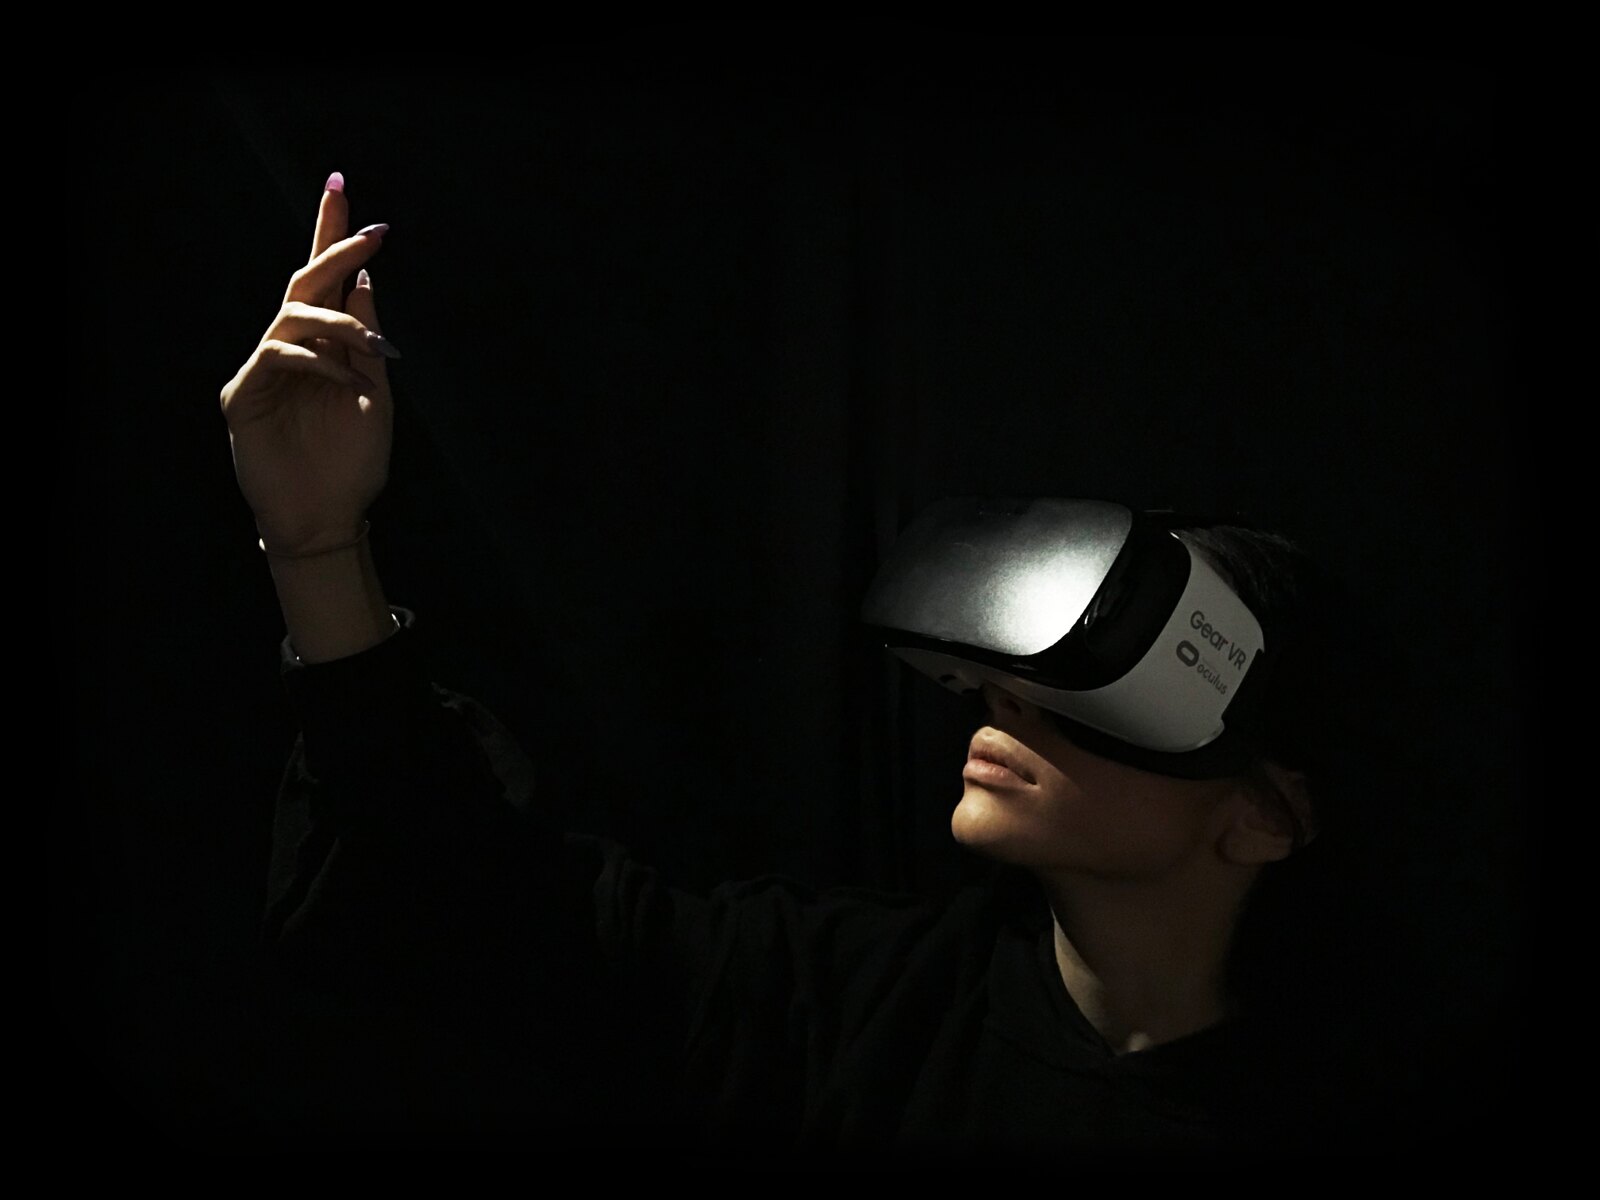 A dancer in a dark room wearing a VR headset raises her arm.